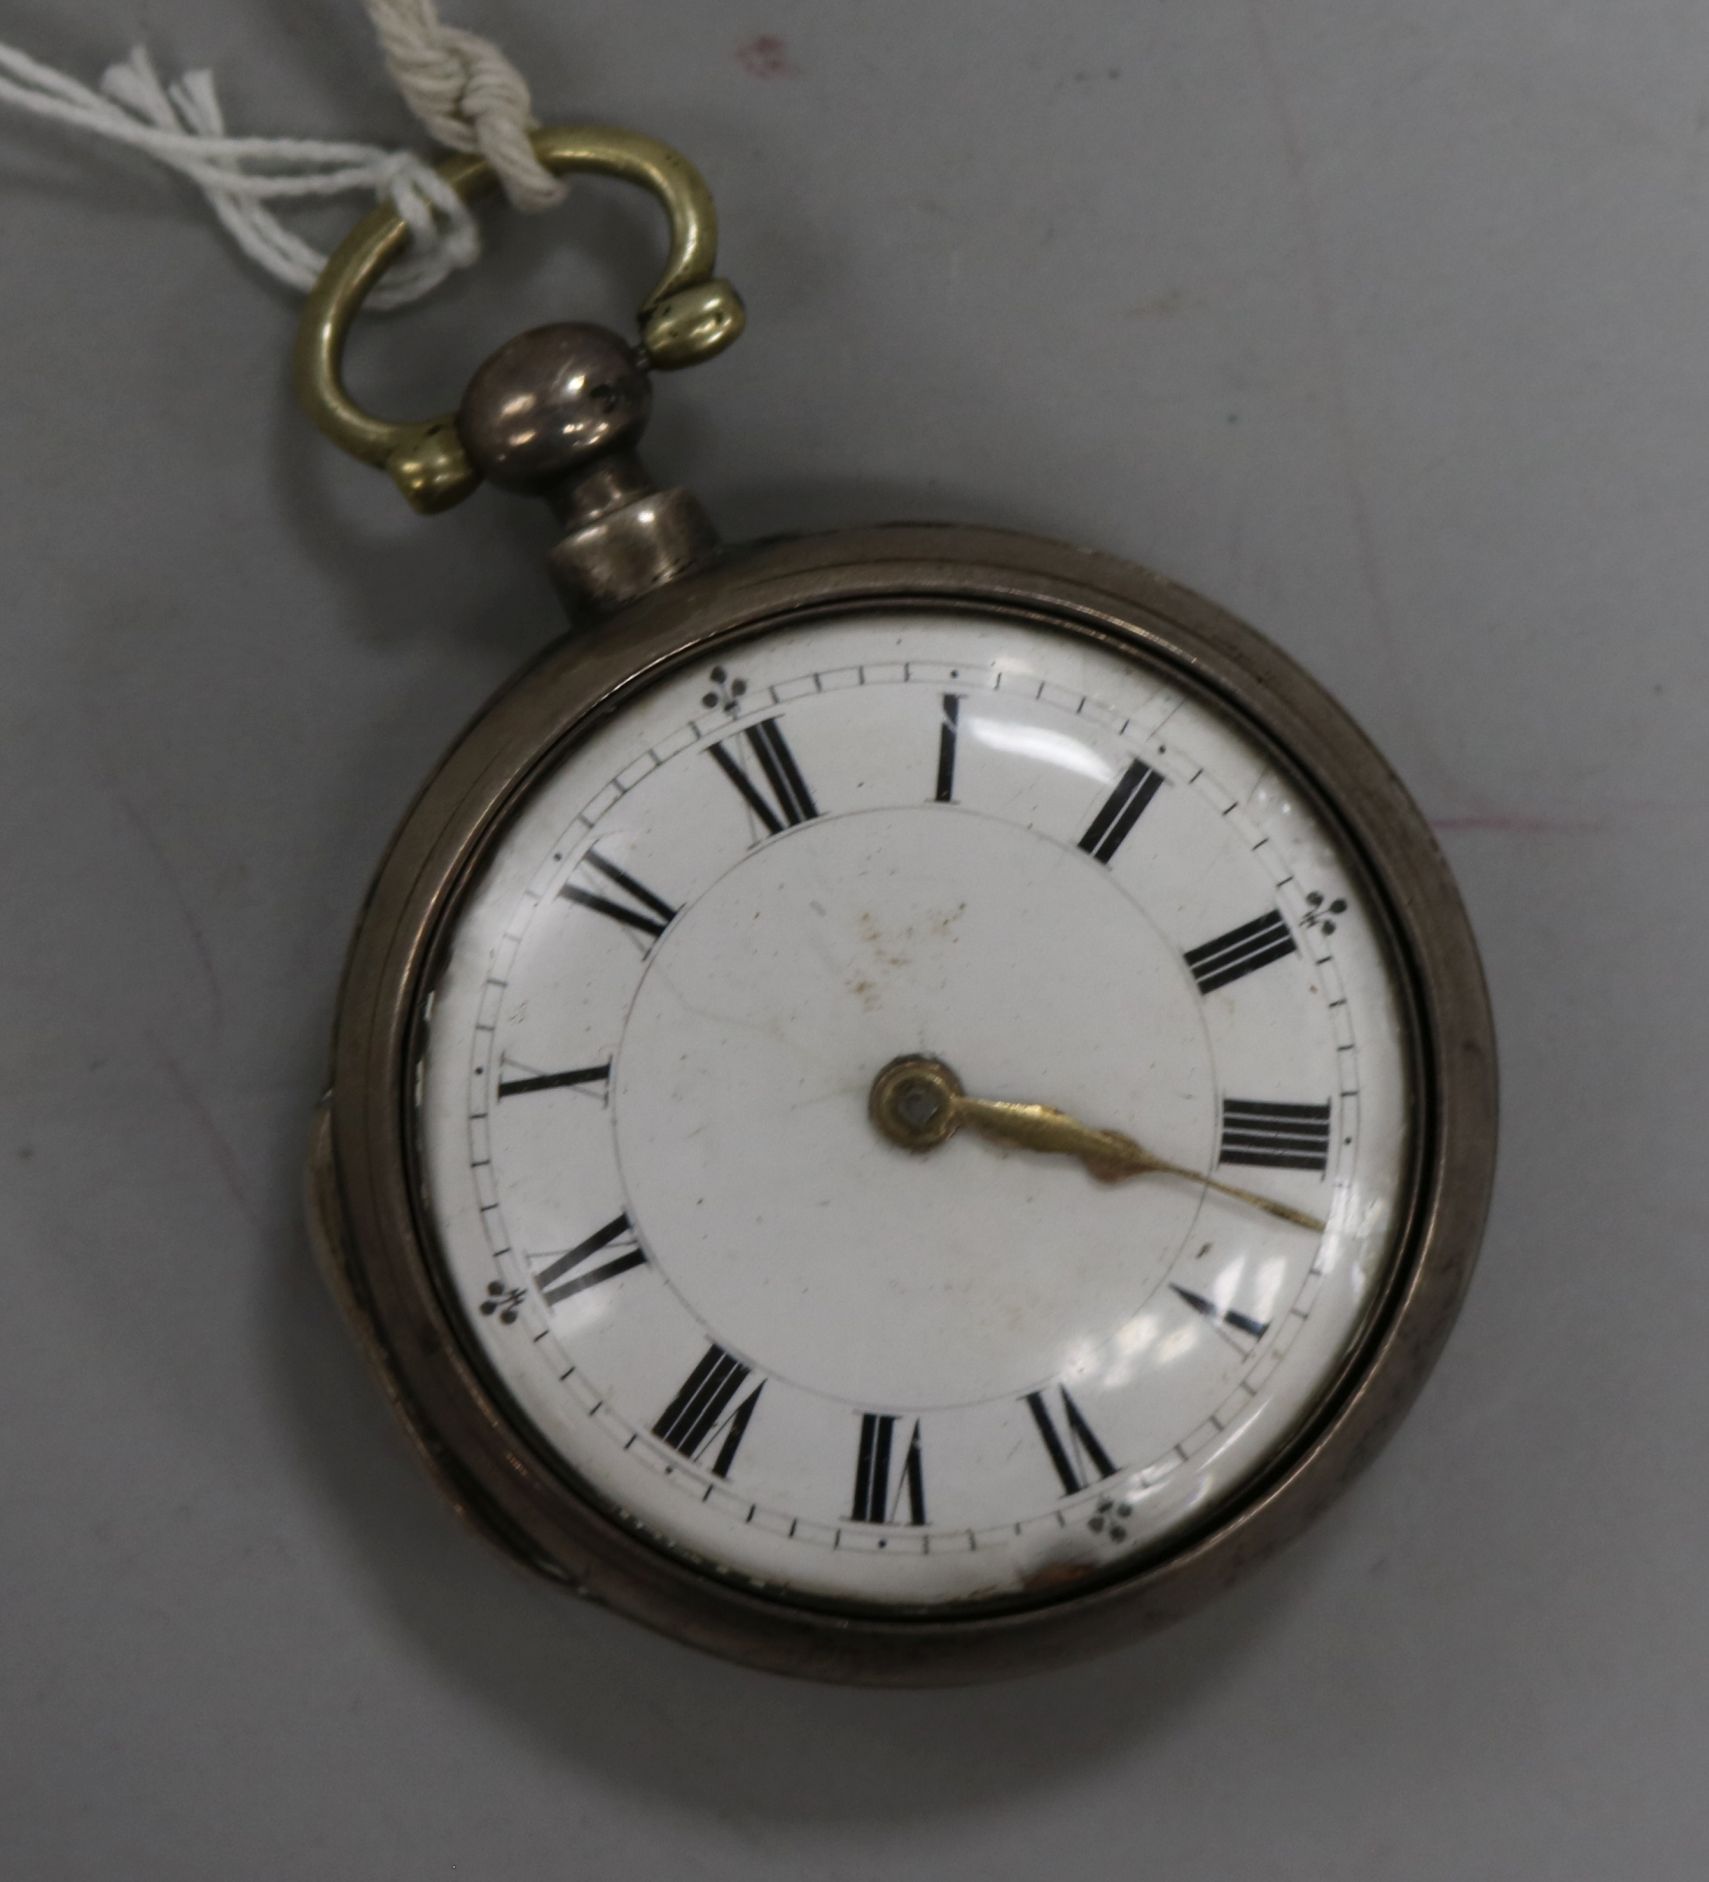 A 19th century silver pair cased verge pocket watch.